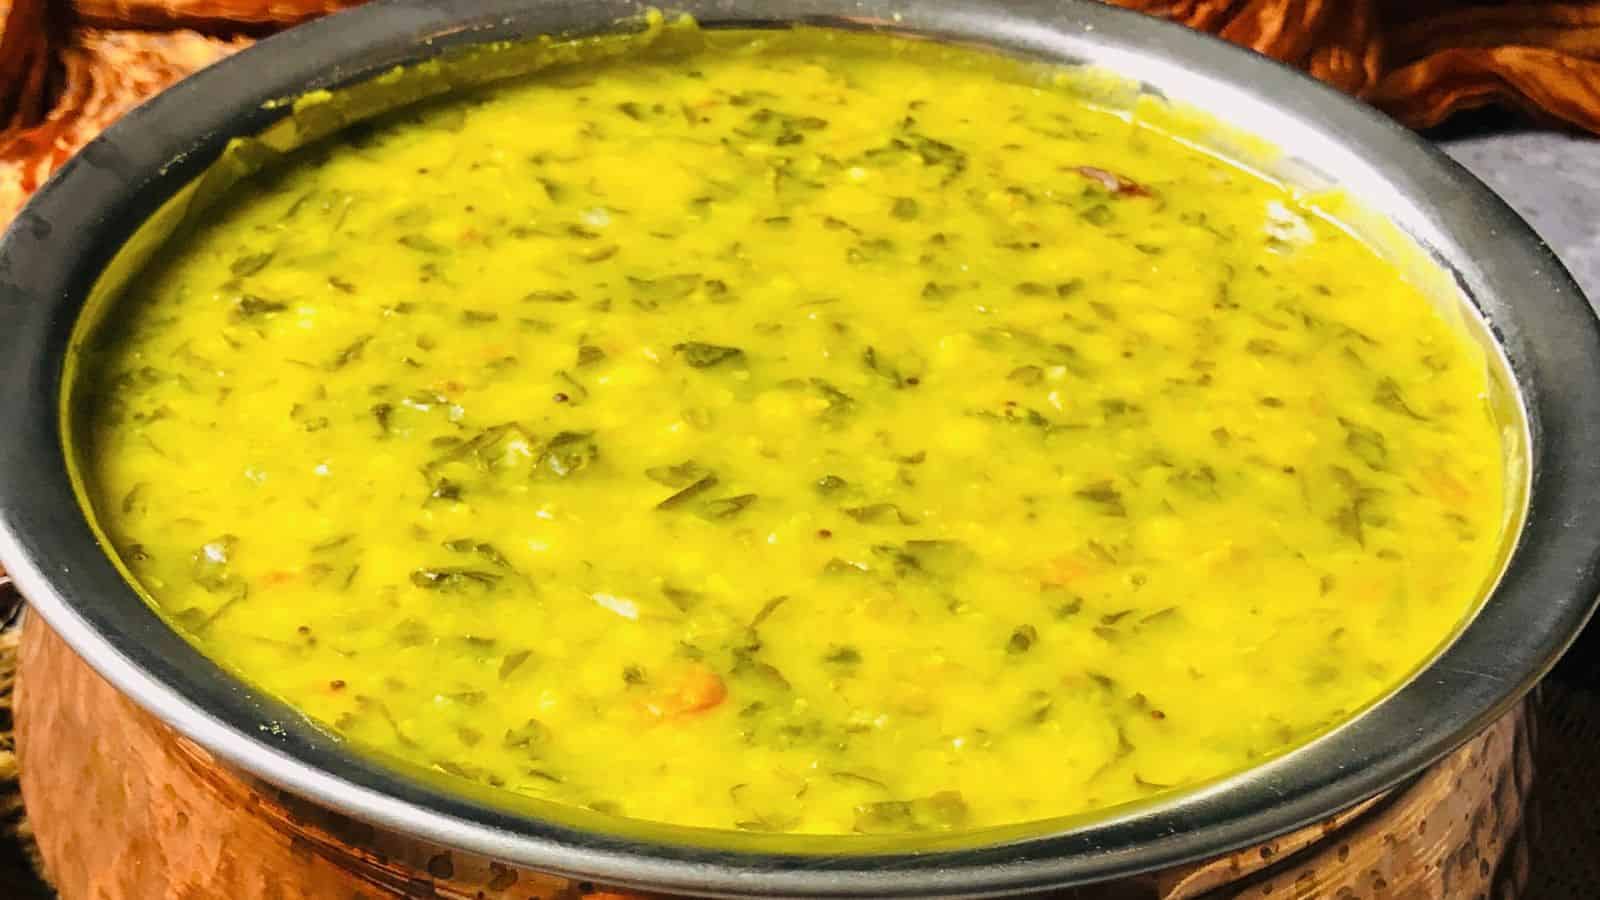 A close-up of a bowl of creamy, methi dal with visible spices and herbs.